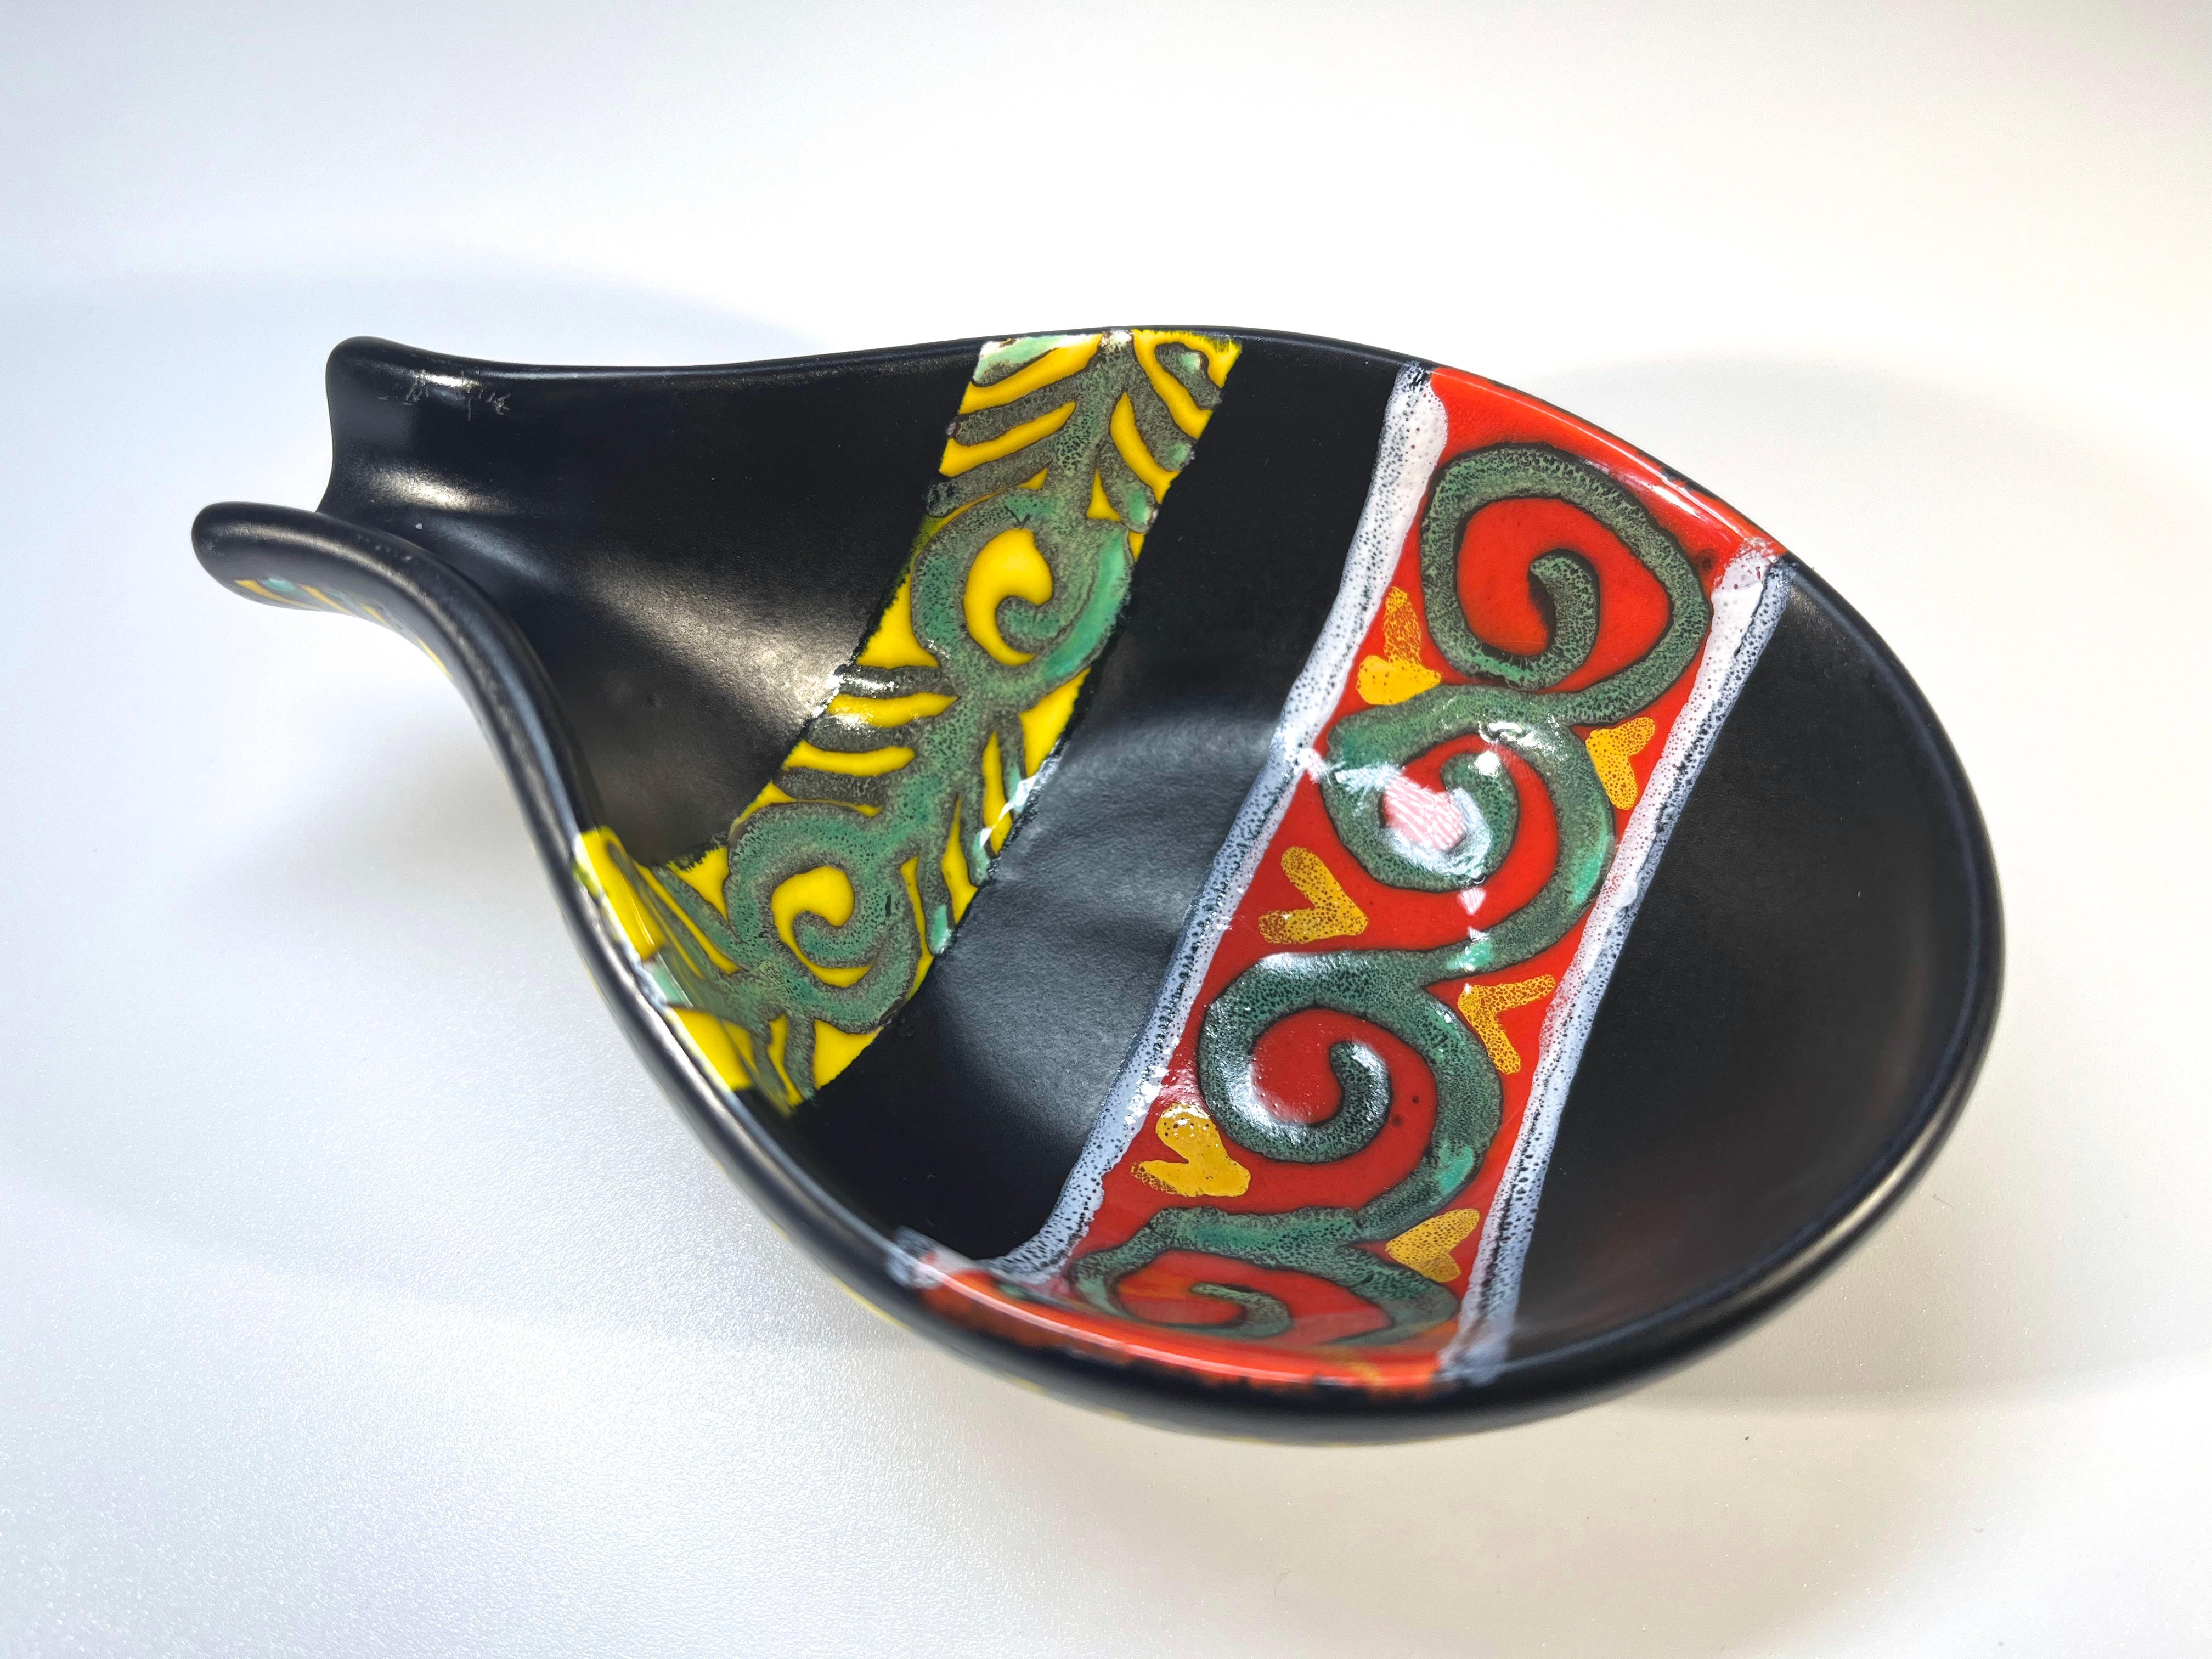 Superb petit ceramic vide poche by Gabriel Fourmaintraux 
Intense black glaze, hand decorated with  distinctive red, yellow and green enamel motifs
Circa 1950
Height 1.5 inch, Width 3.5 inch, Depth 5 inch
Excellent condition and glaze
Wear